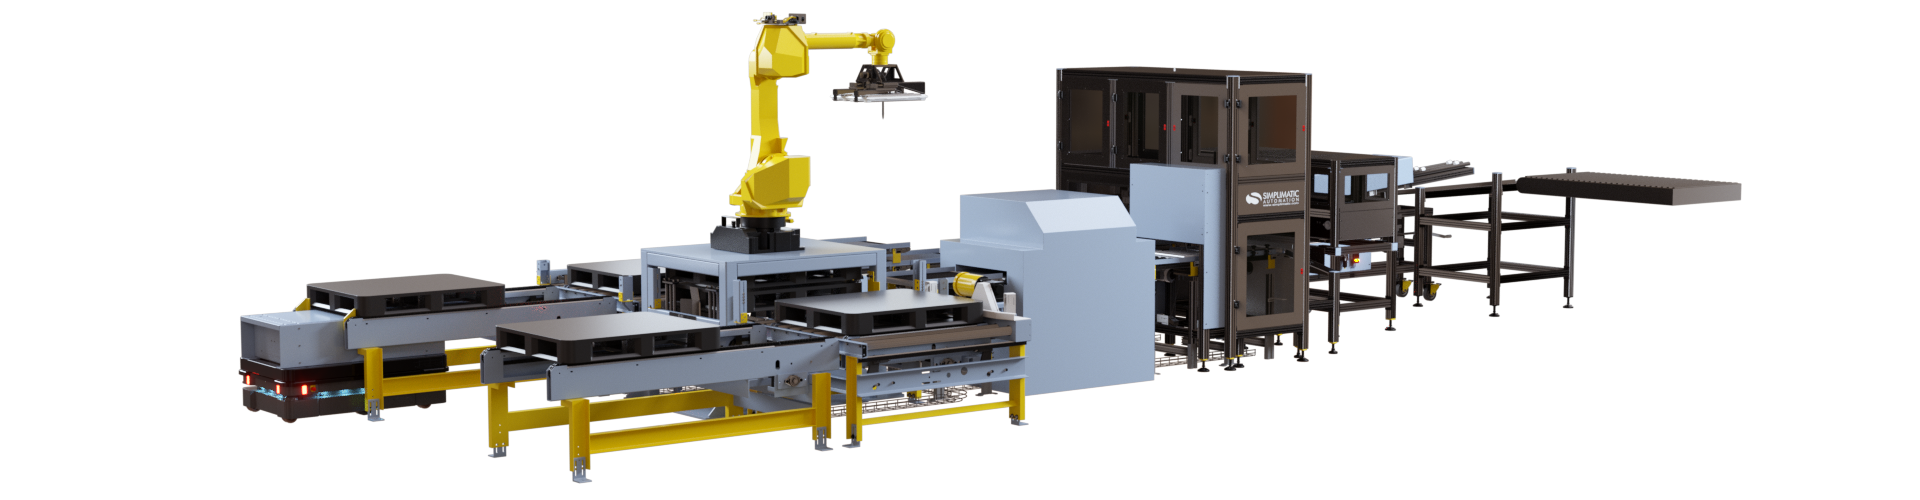 MIR Robotic Automation Assembly Line